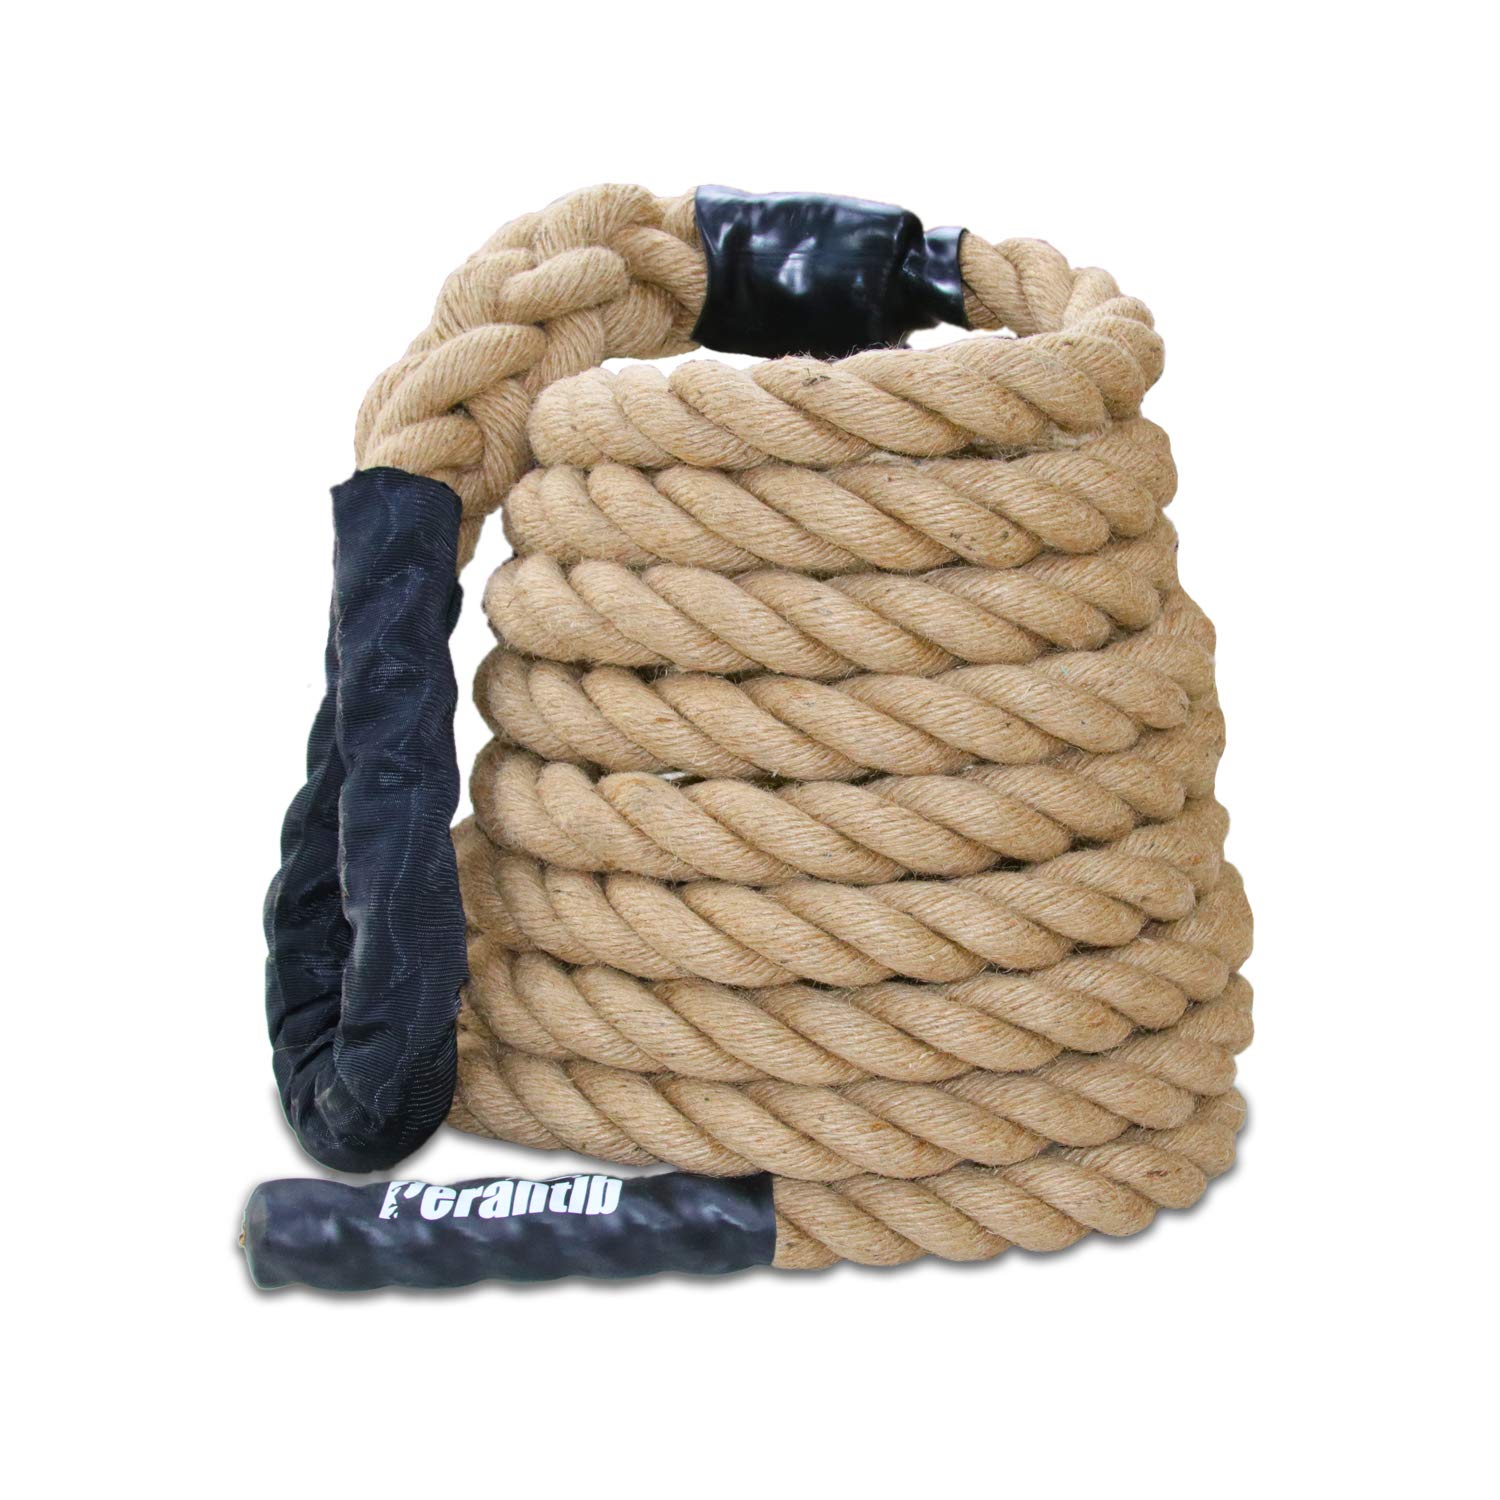 Perantlb Outdoor Climbing Rope for Fitness and Strength Training